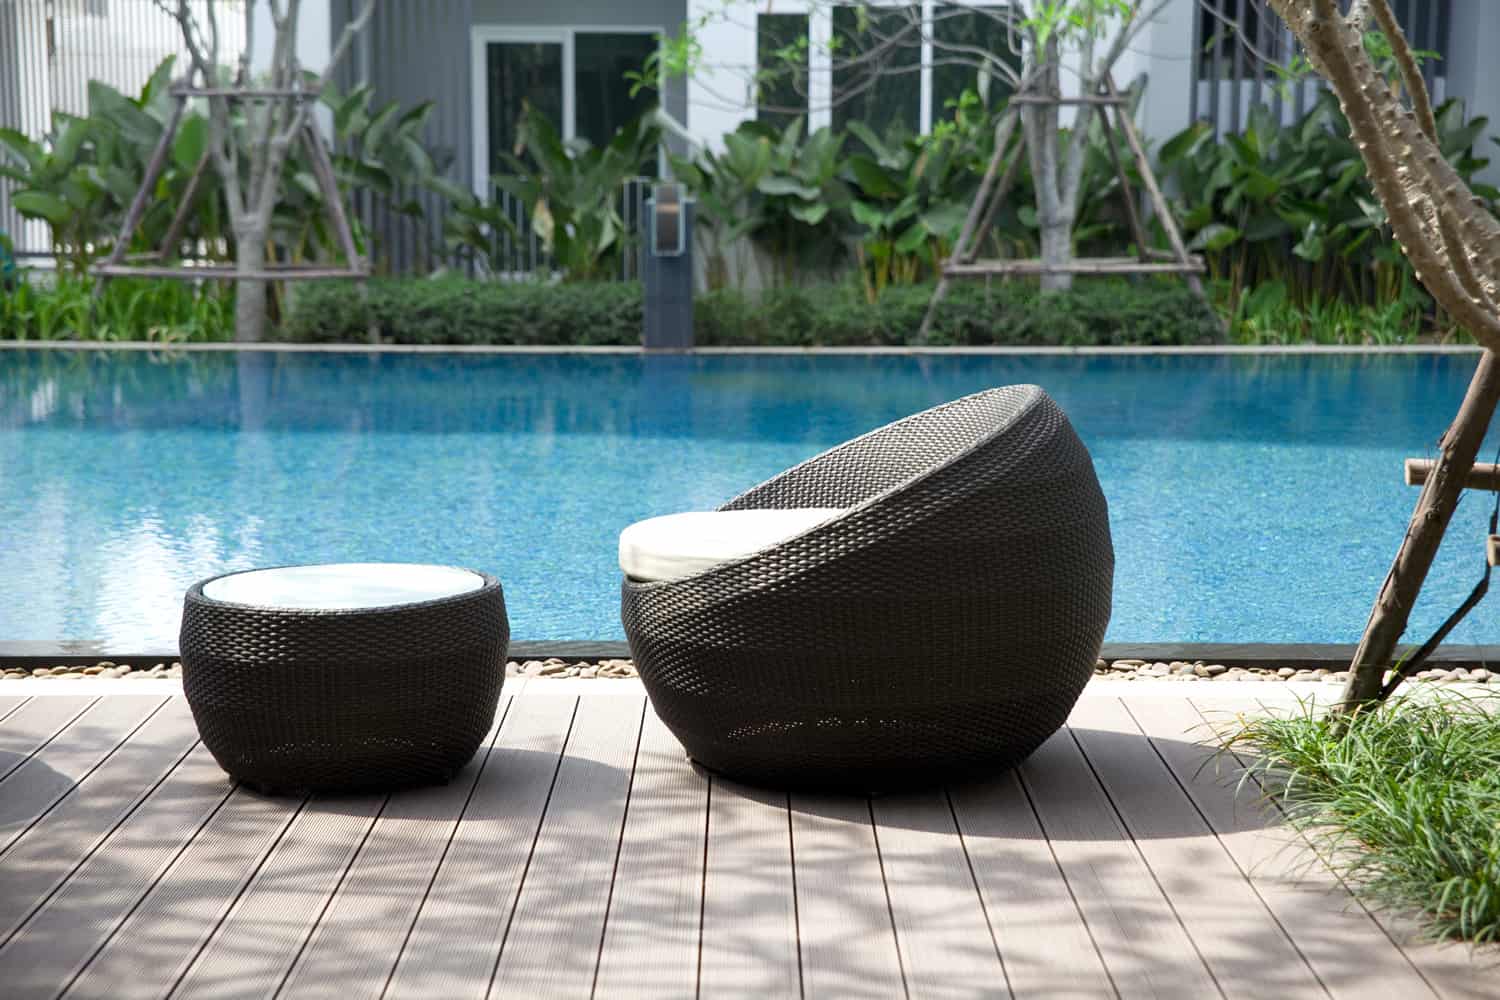 Black weave chairs with white cushions in front of outdoor pool